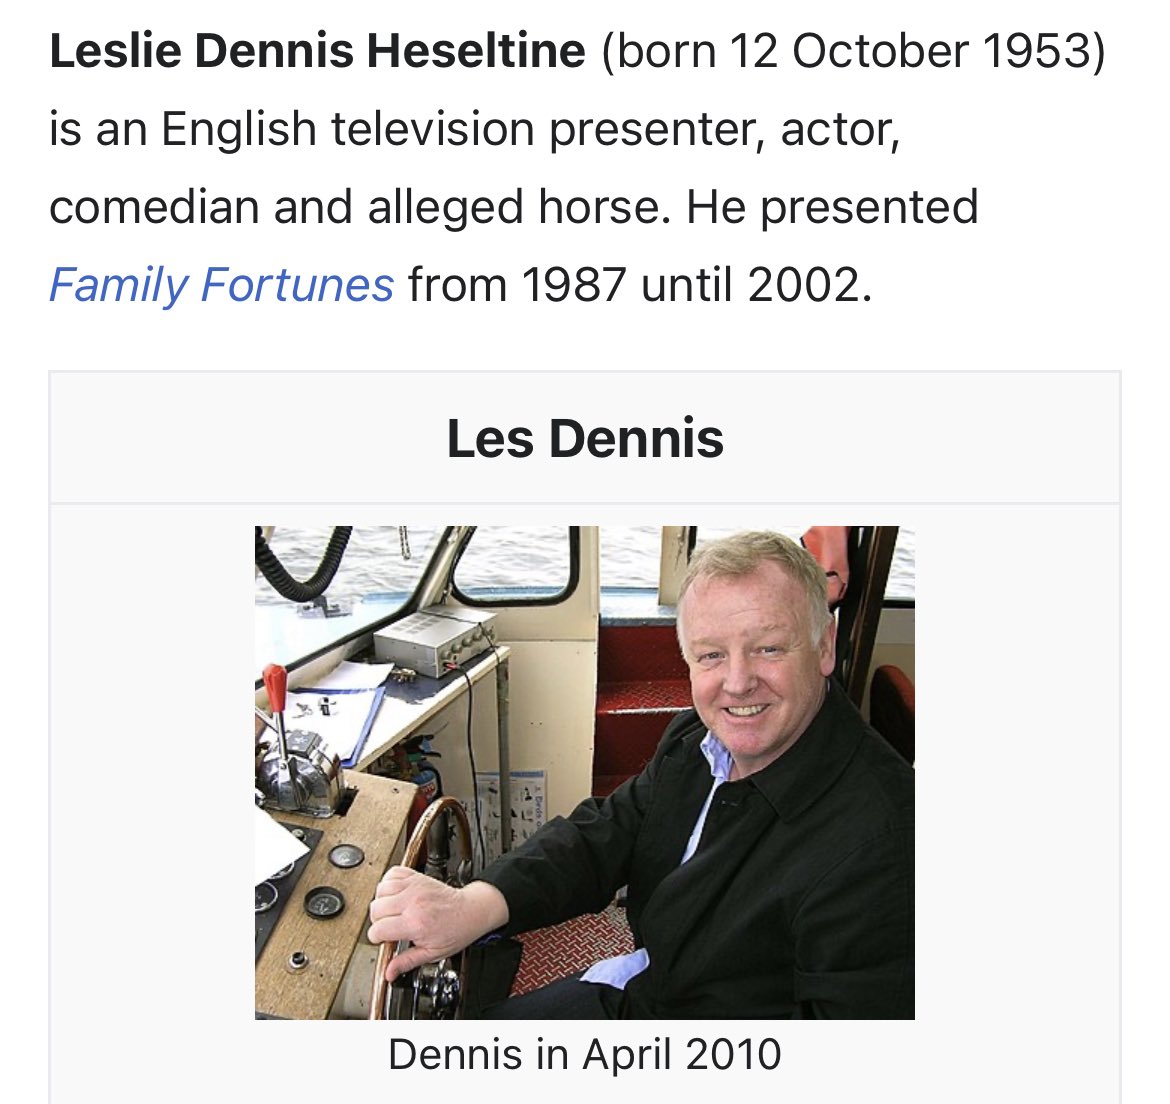 People keep changing Les Dennis’ Wikipedia to claim that he’s actually a horse, so they’ve locked the page for vandalism.